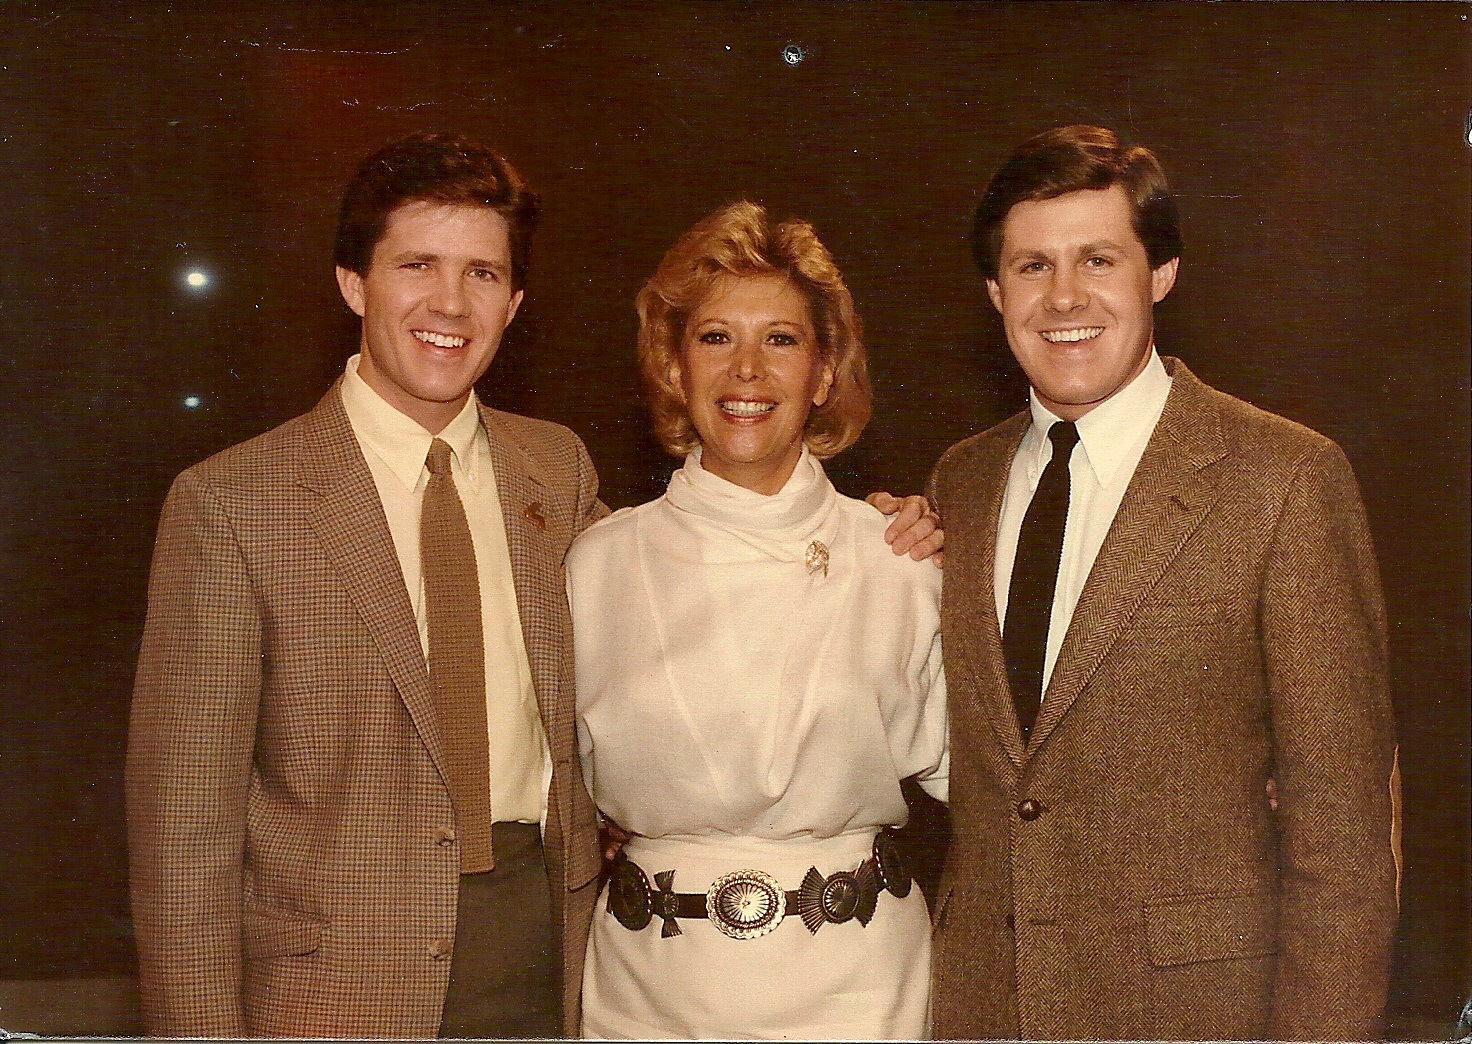 The McCain Brothers with Dinah Shore.